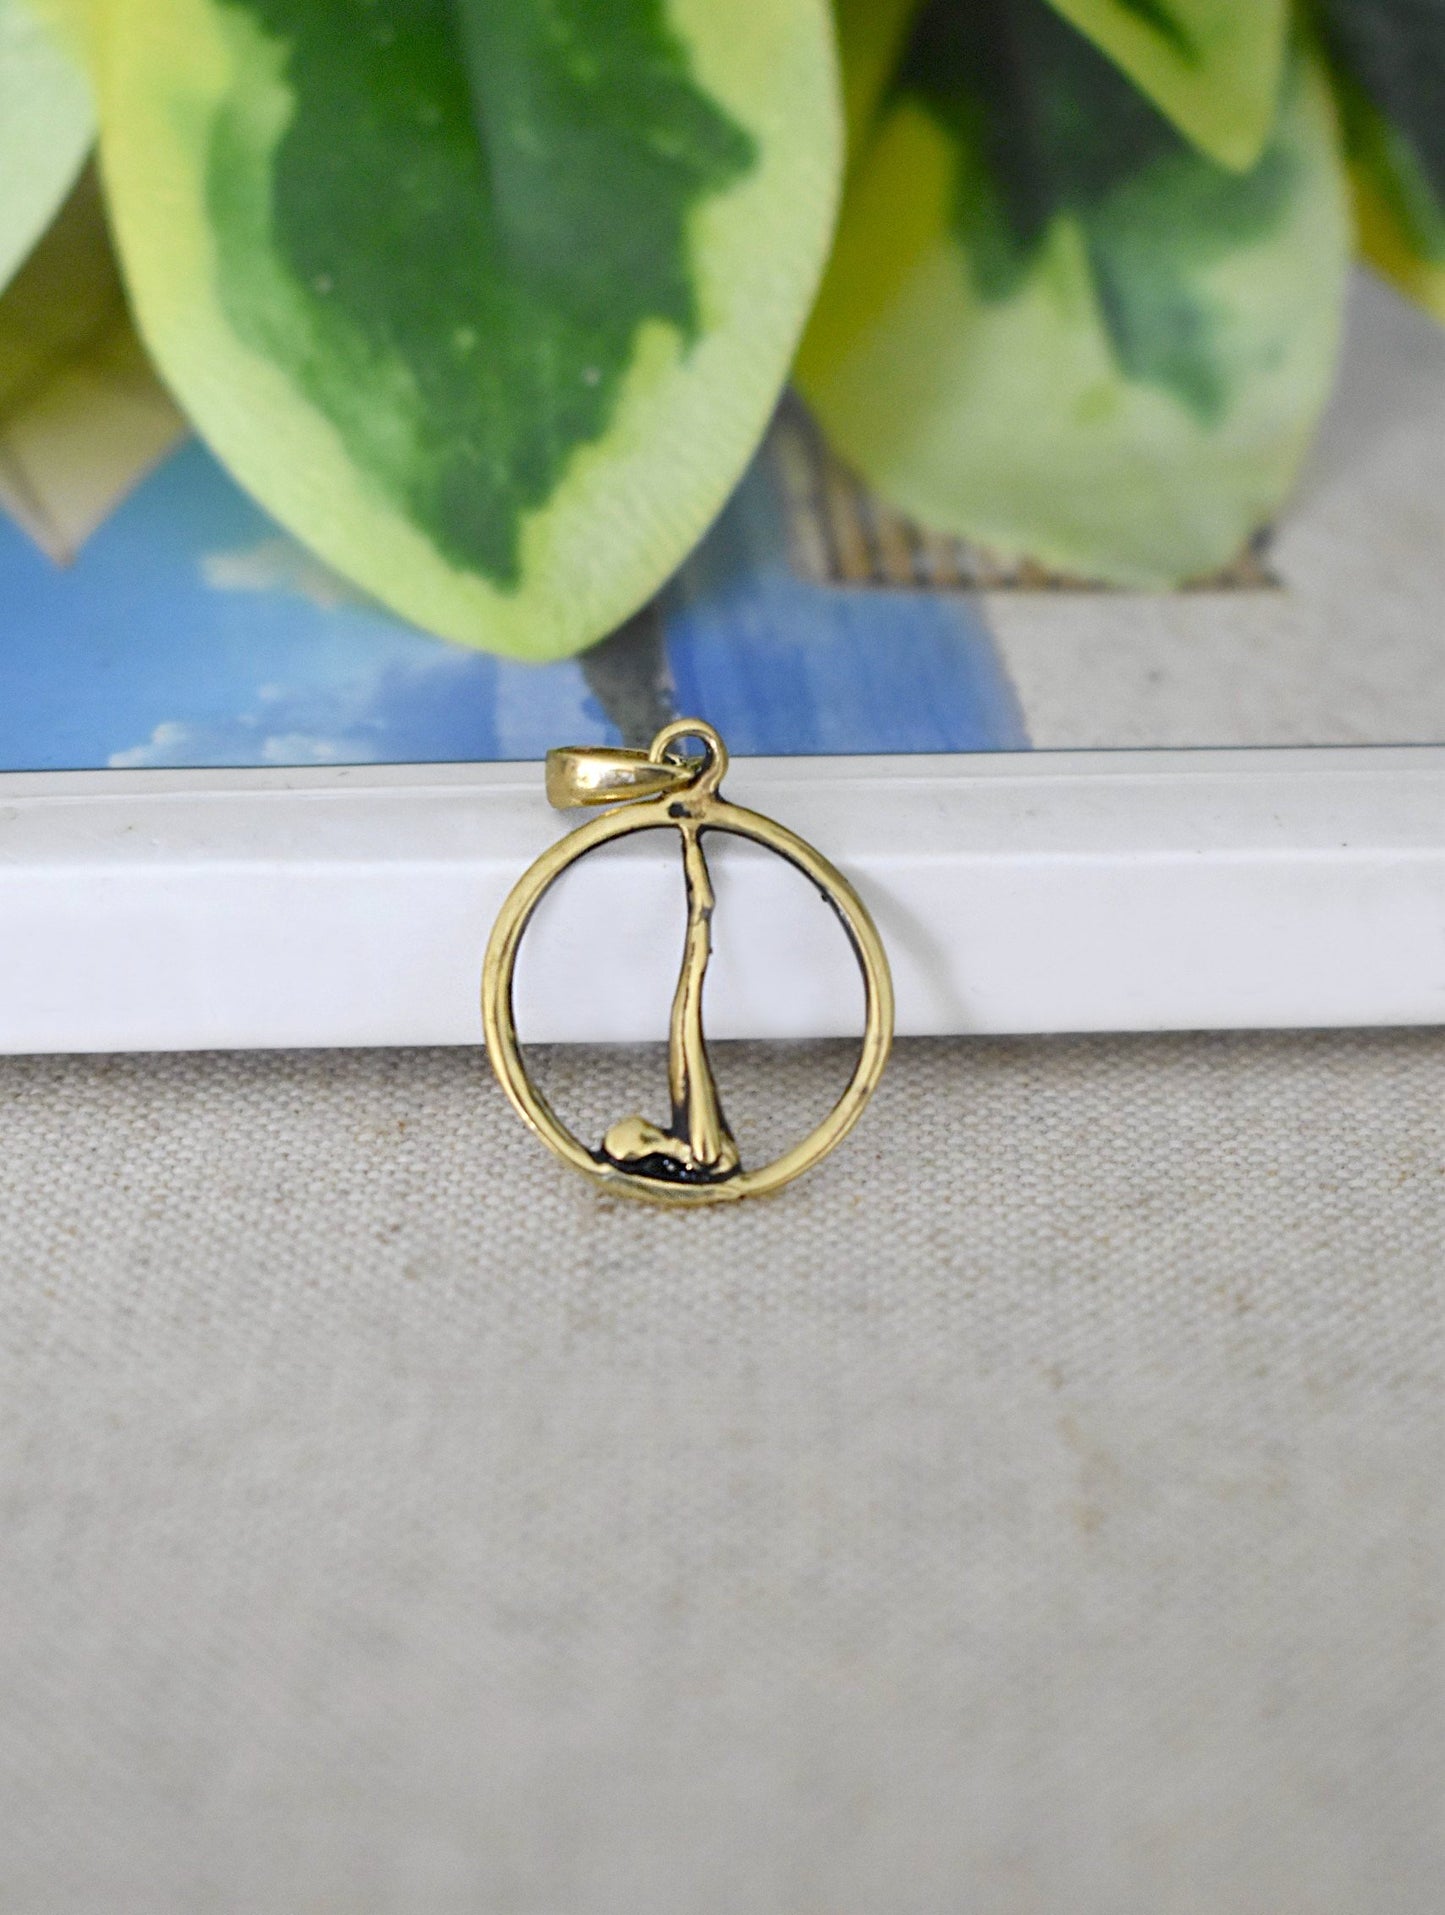 Yoga Pose 92.5 Sterling Silver Gold Brass Charm Necklace Pendant Jewelry